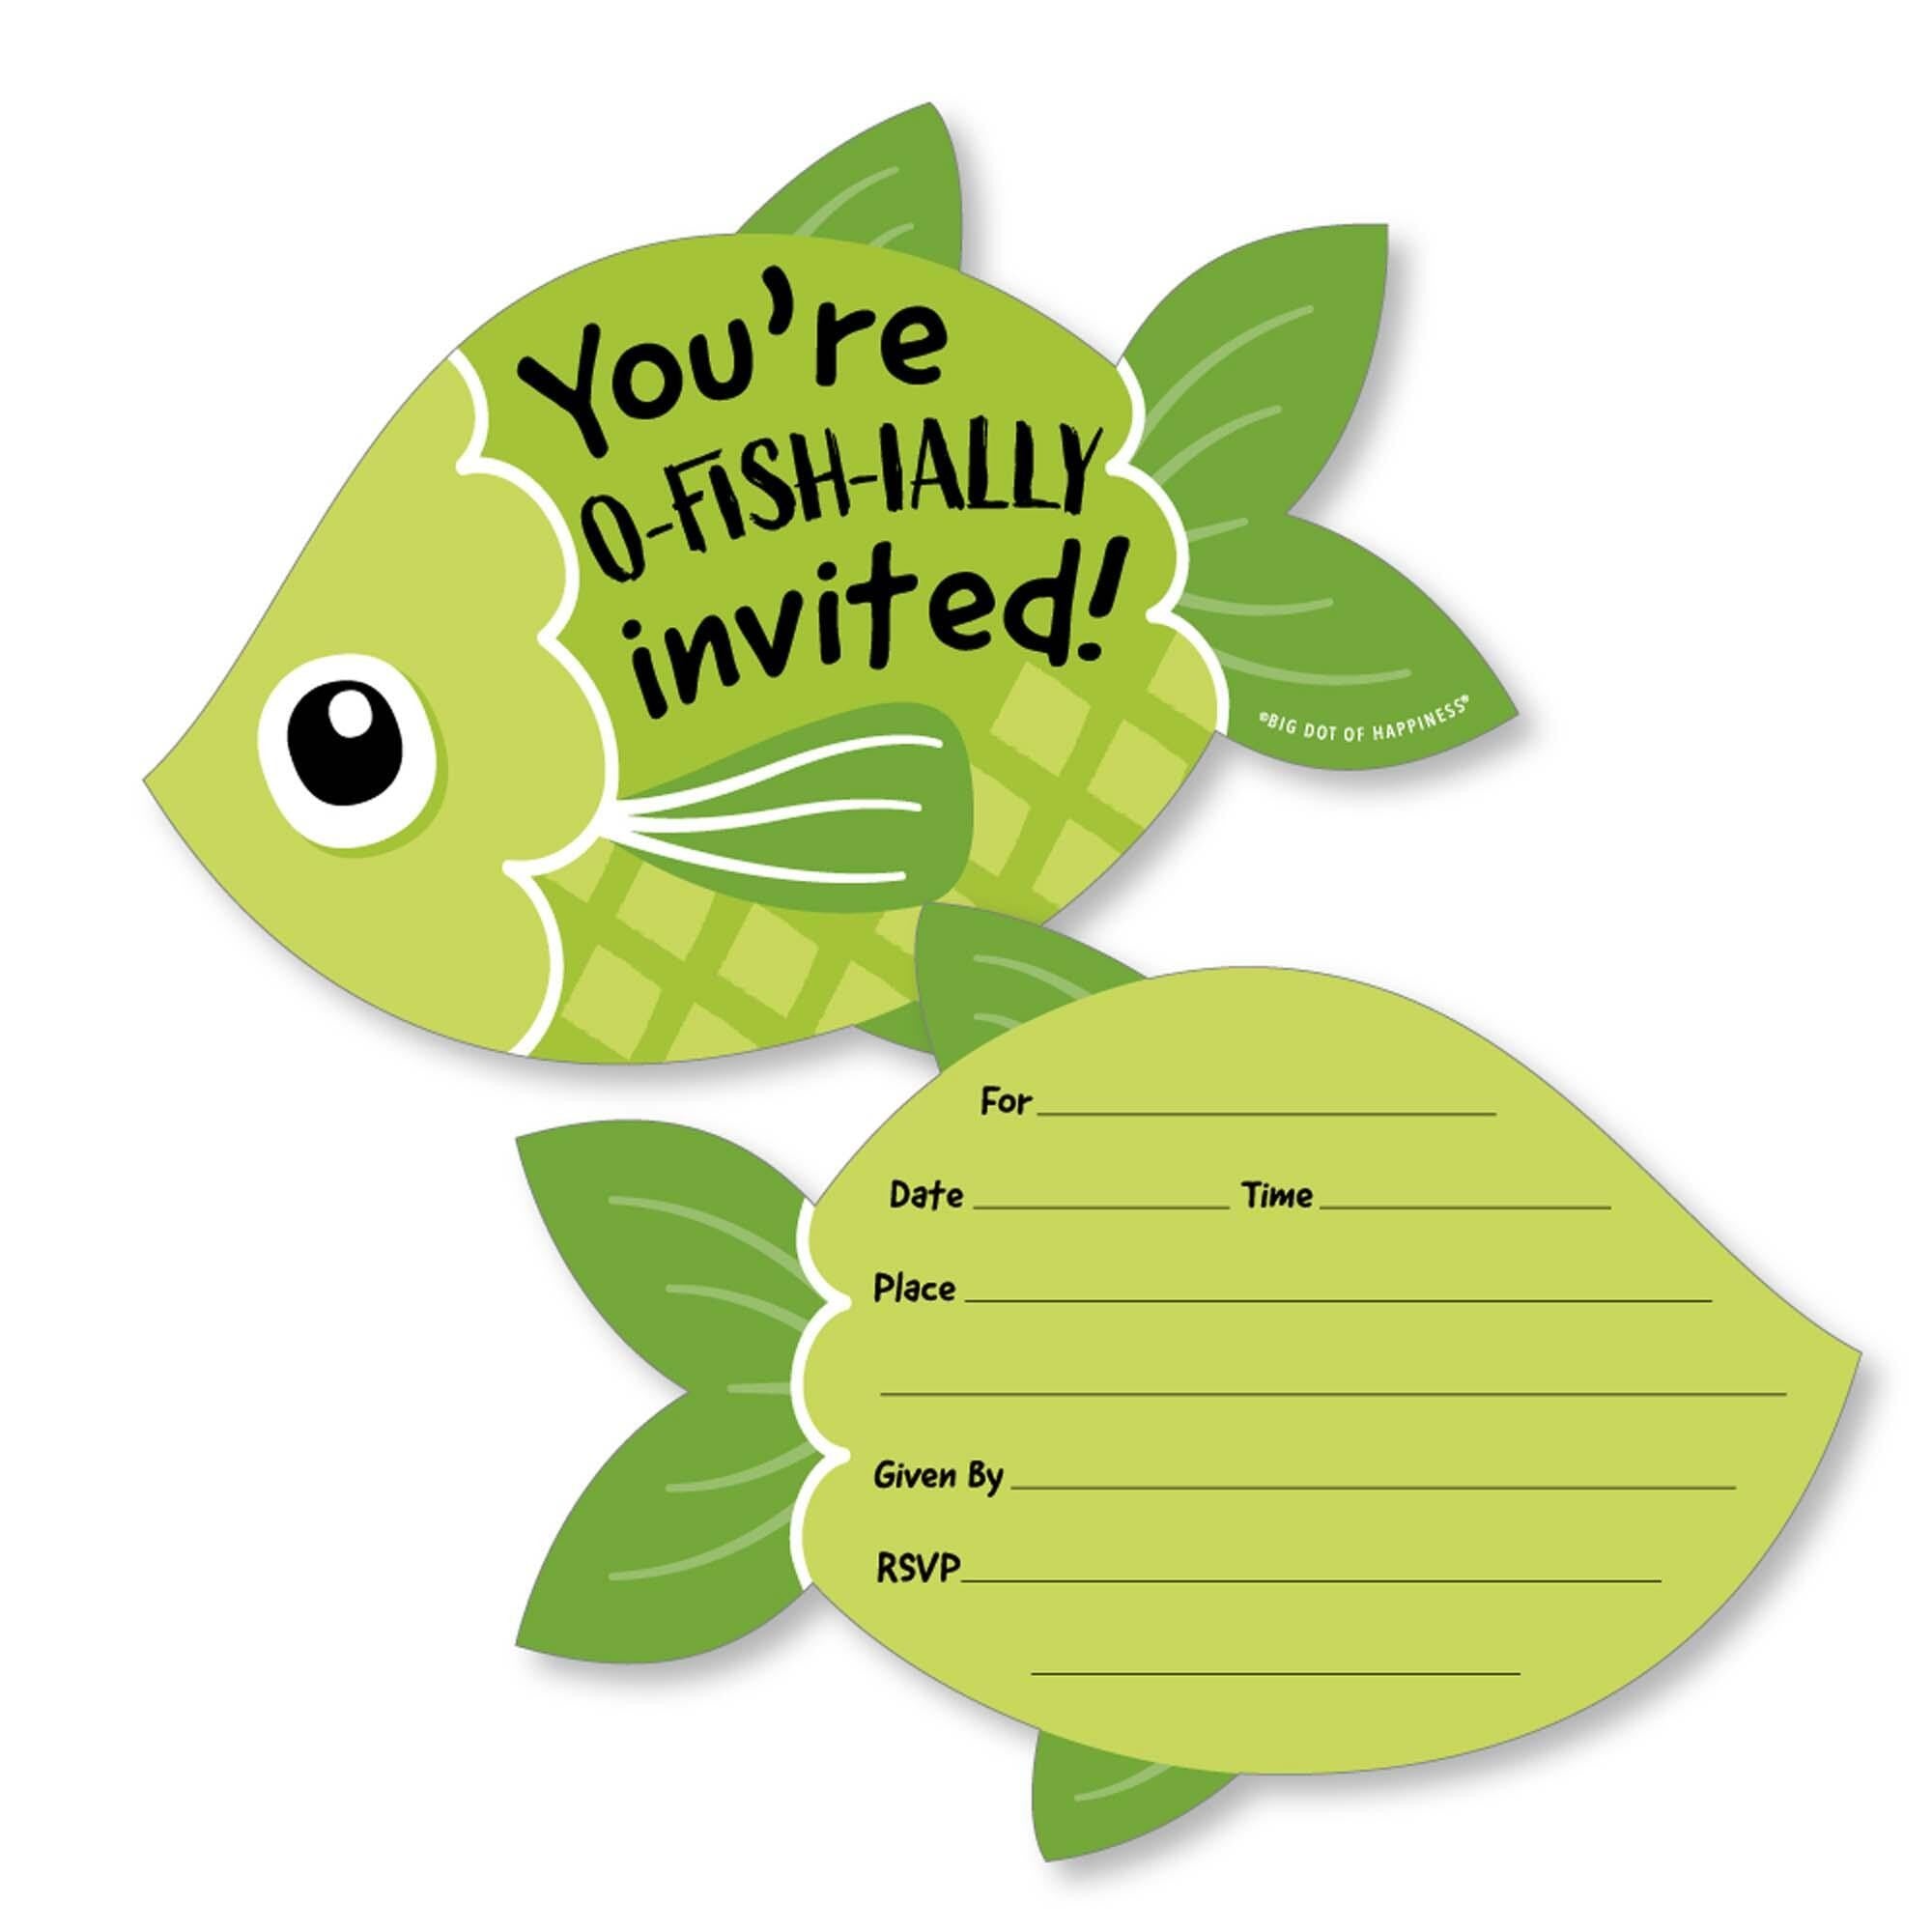 Let's Go Fishing - Shaped Fill-in Invitations - Fish Themed Birthday Party or Baby Shower Invitation Cards with Envelopes - Set of 12